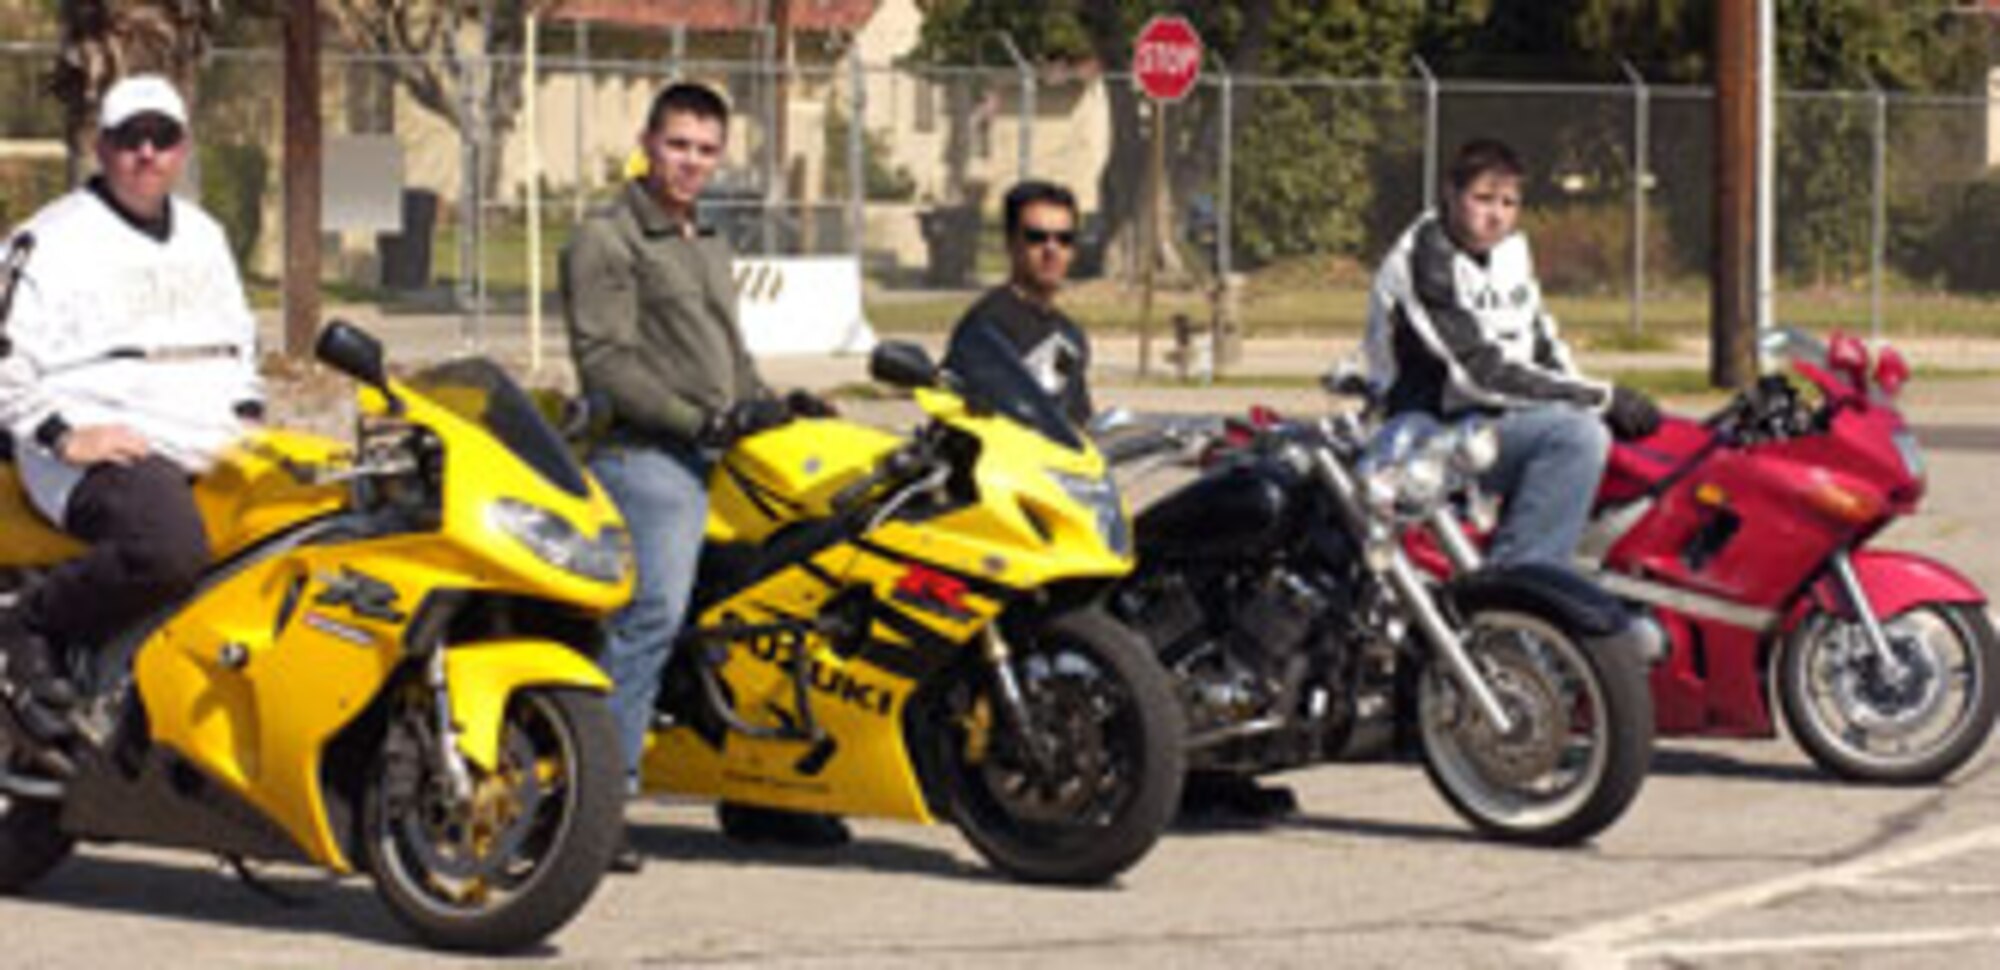 (Left to right) Volunteer instructor Gene Reeks, certified by the Motor Safety Foundation, students Senior Airman Jaime Hinojosa-Guzman, 452nd Logistics Readiness Squadron, Staff Sgt. Maro Mercado, 452nd Aircraft Maintenance Squadron and Caleb Hewitt, civilian contractor with the 163rd Reconnaissance Wing teach new riders at March Air Reserve Base. (U.S. Air Force photo by Staff Sgt. Amy Abbott)